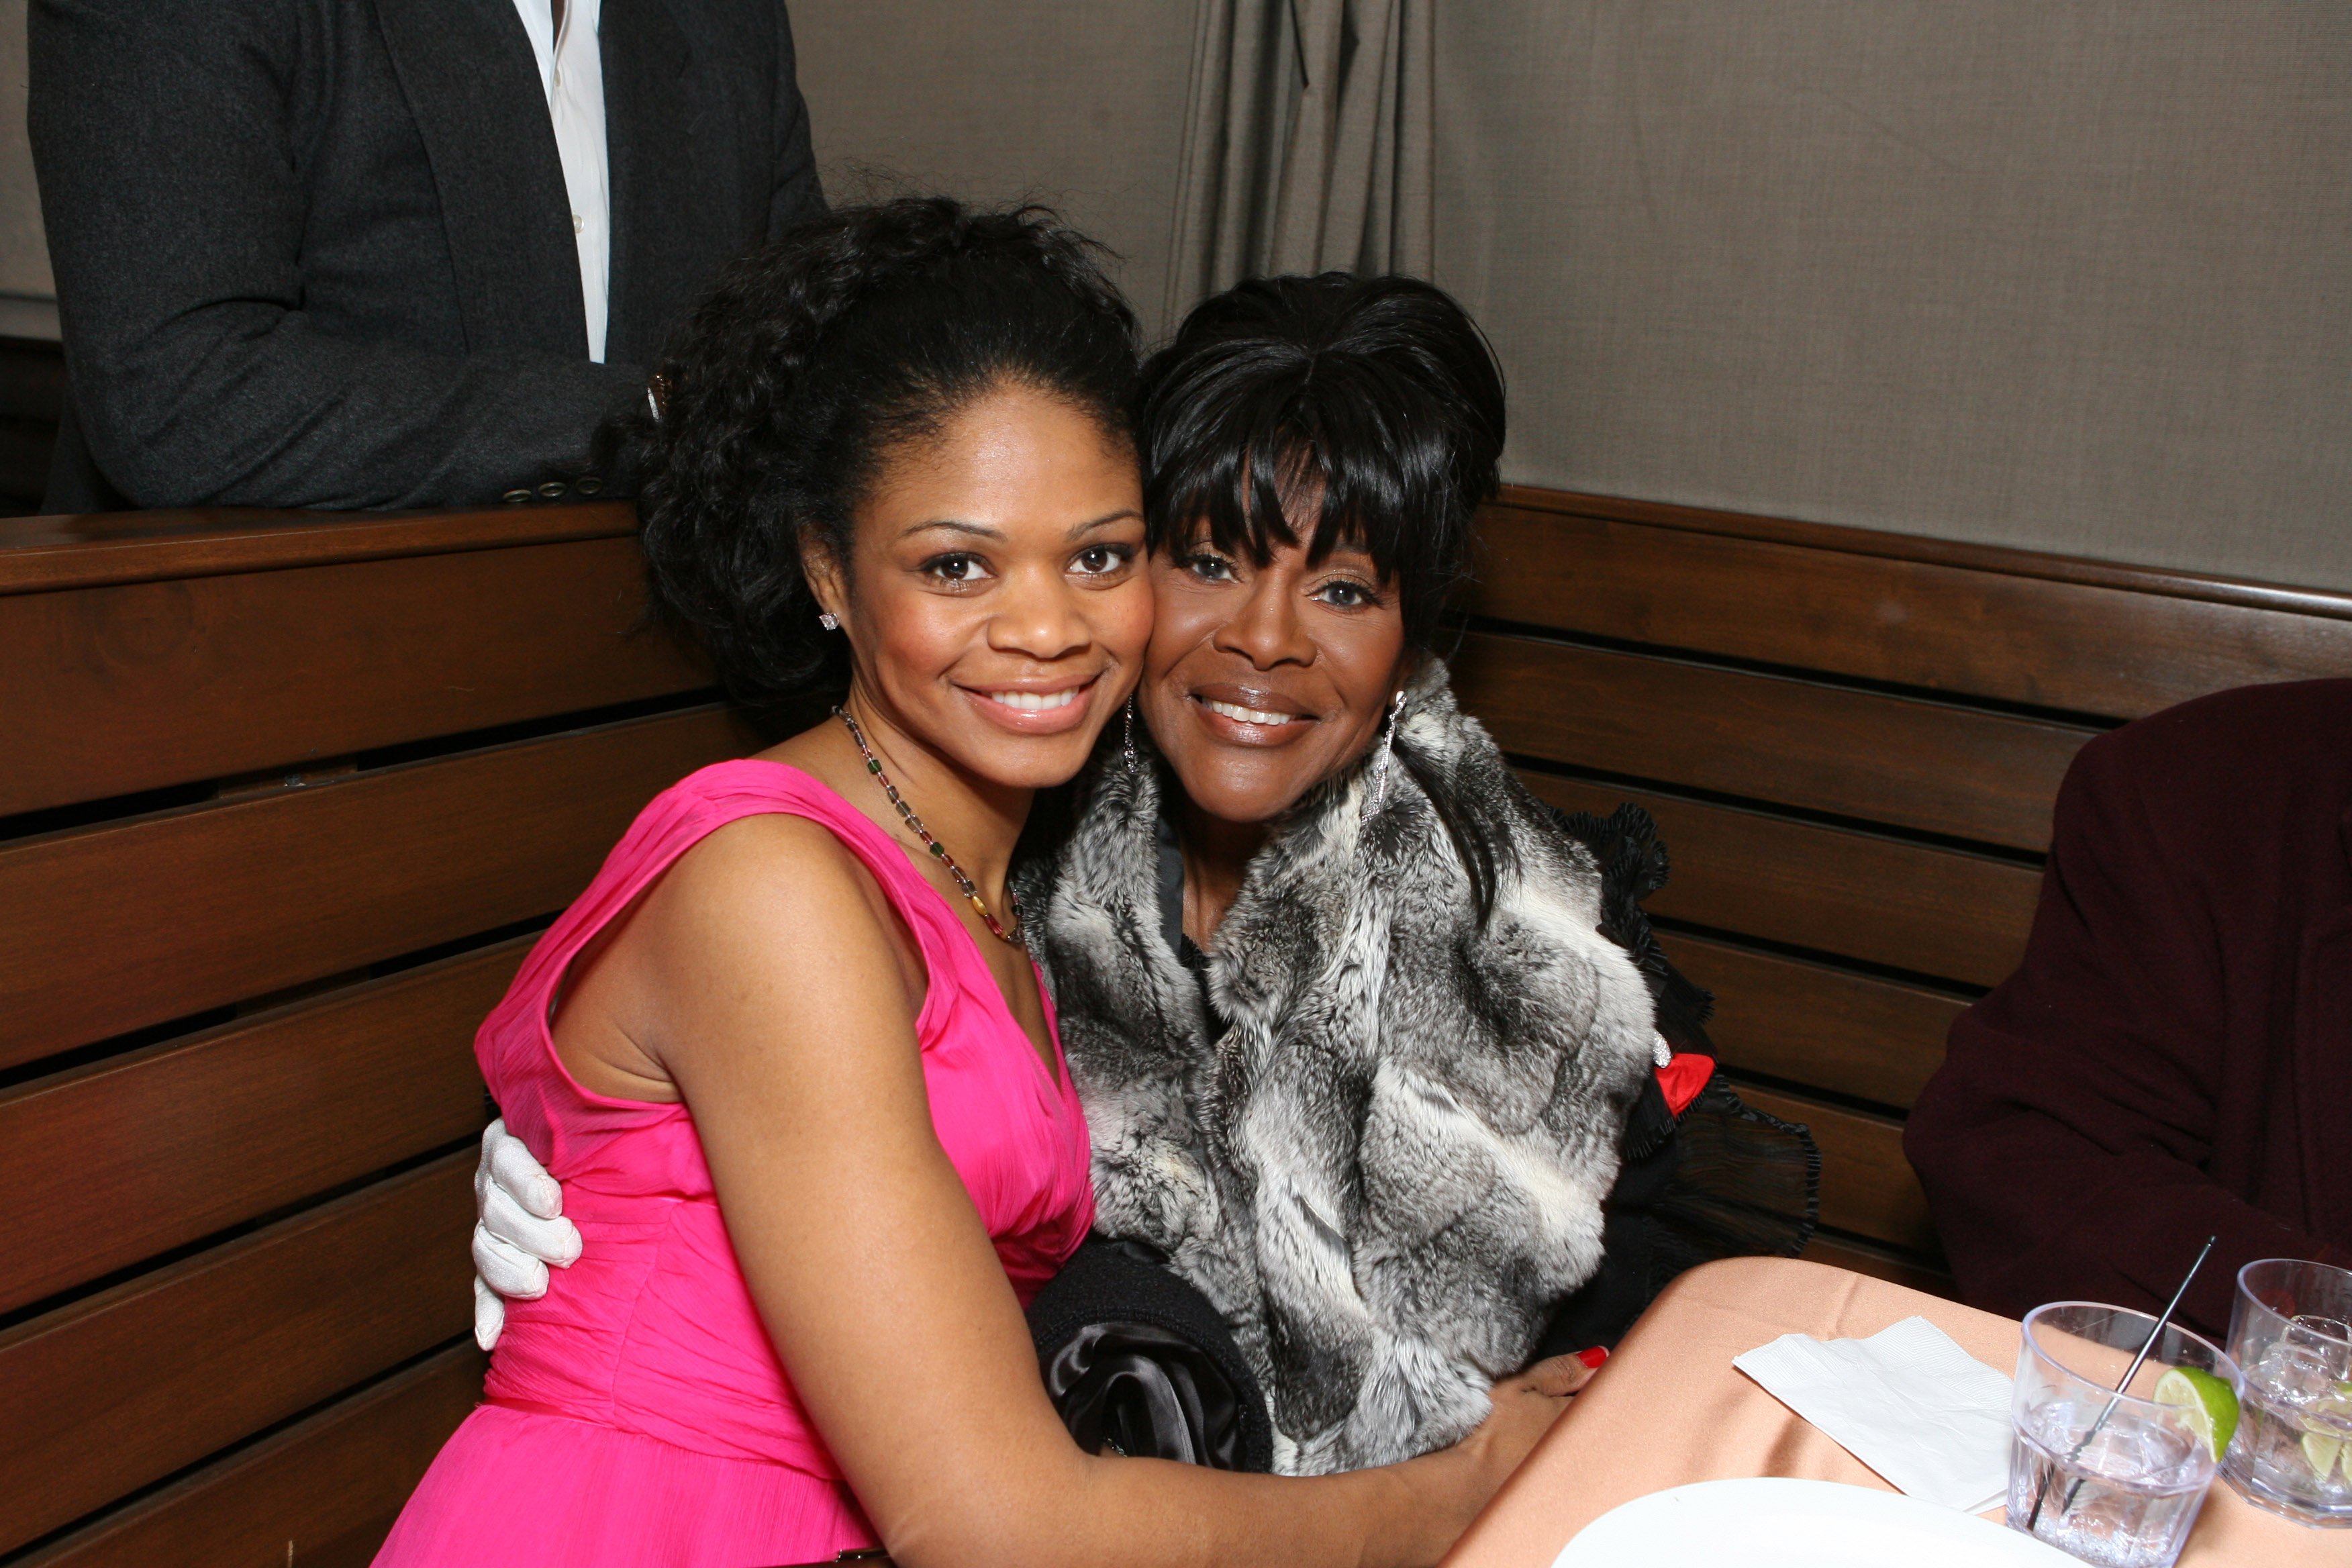 Kimberly Elise smiling in a pink dress/Cicely Tyson smiling in a fur coat.